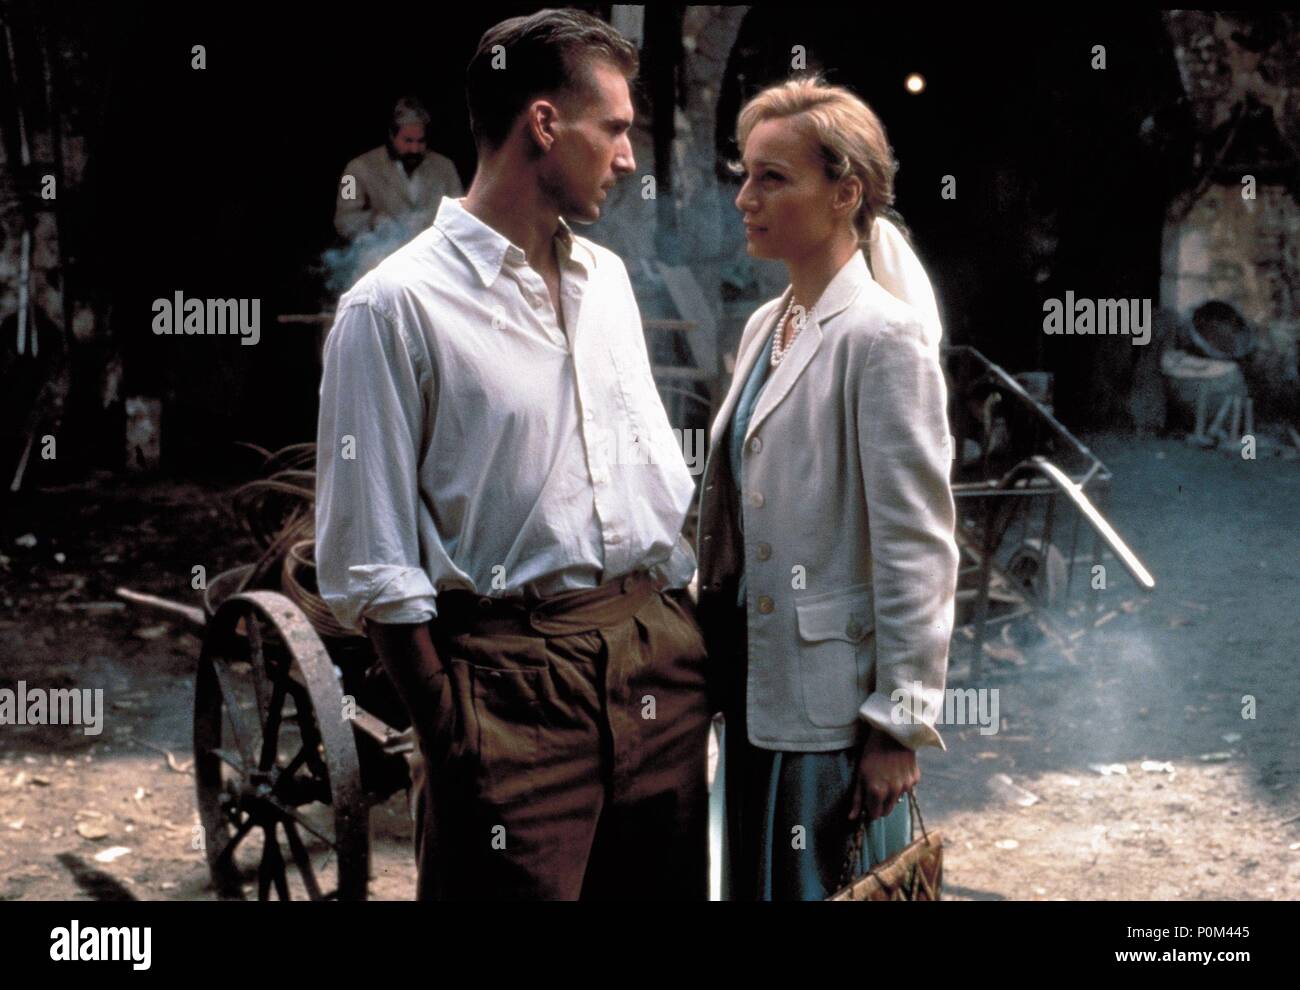 Original Film Title: THE ENGLISH PATIENT.  English Title: THE ENGLISH PATIENT.  Film Director: ANTHONY MINGHELLA.  Year: 1996.  Stars: KRISTIN SCOTT THOMAS; RALPH FIENNES. Copyright: Editorial inside use only. This is a publicly distributed handout. Access rights only, no license of copyright provided. Mandatory authorization to Visual Icon (www.visual-icon.com) is required for the reproduction of this image. Credit: MIRAMAX / Album Stock Photo